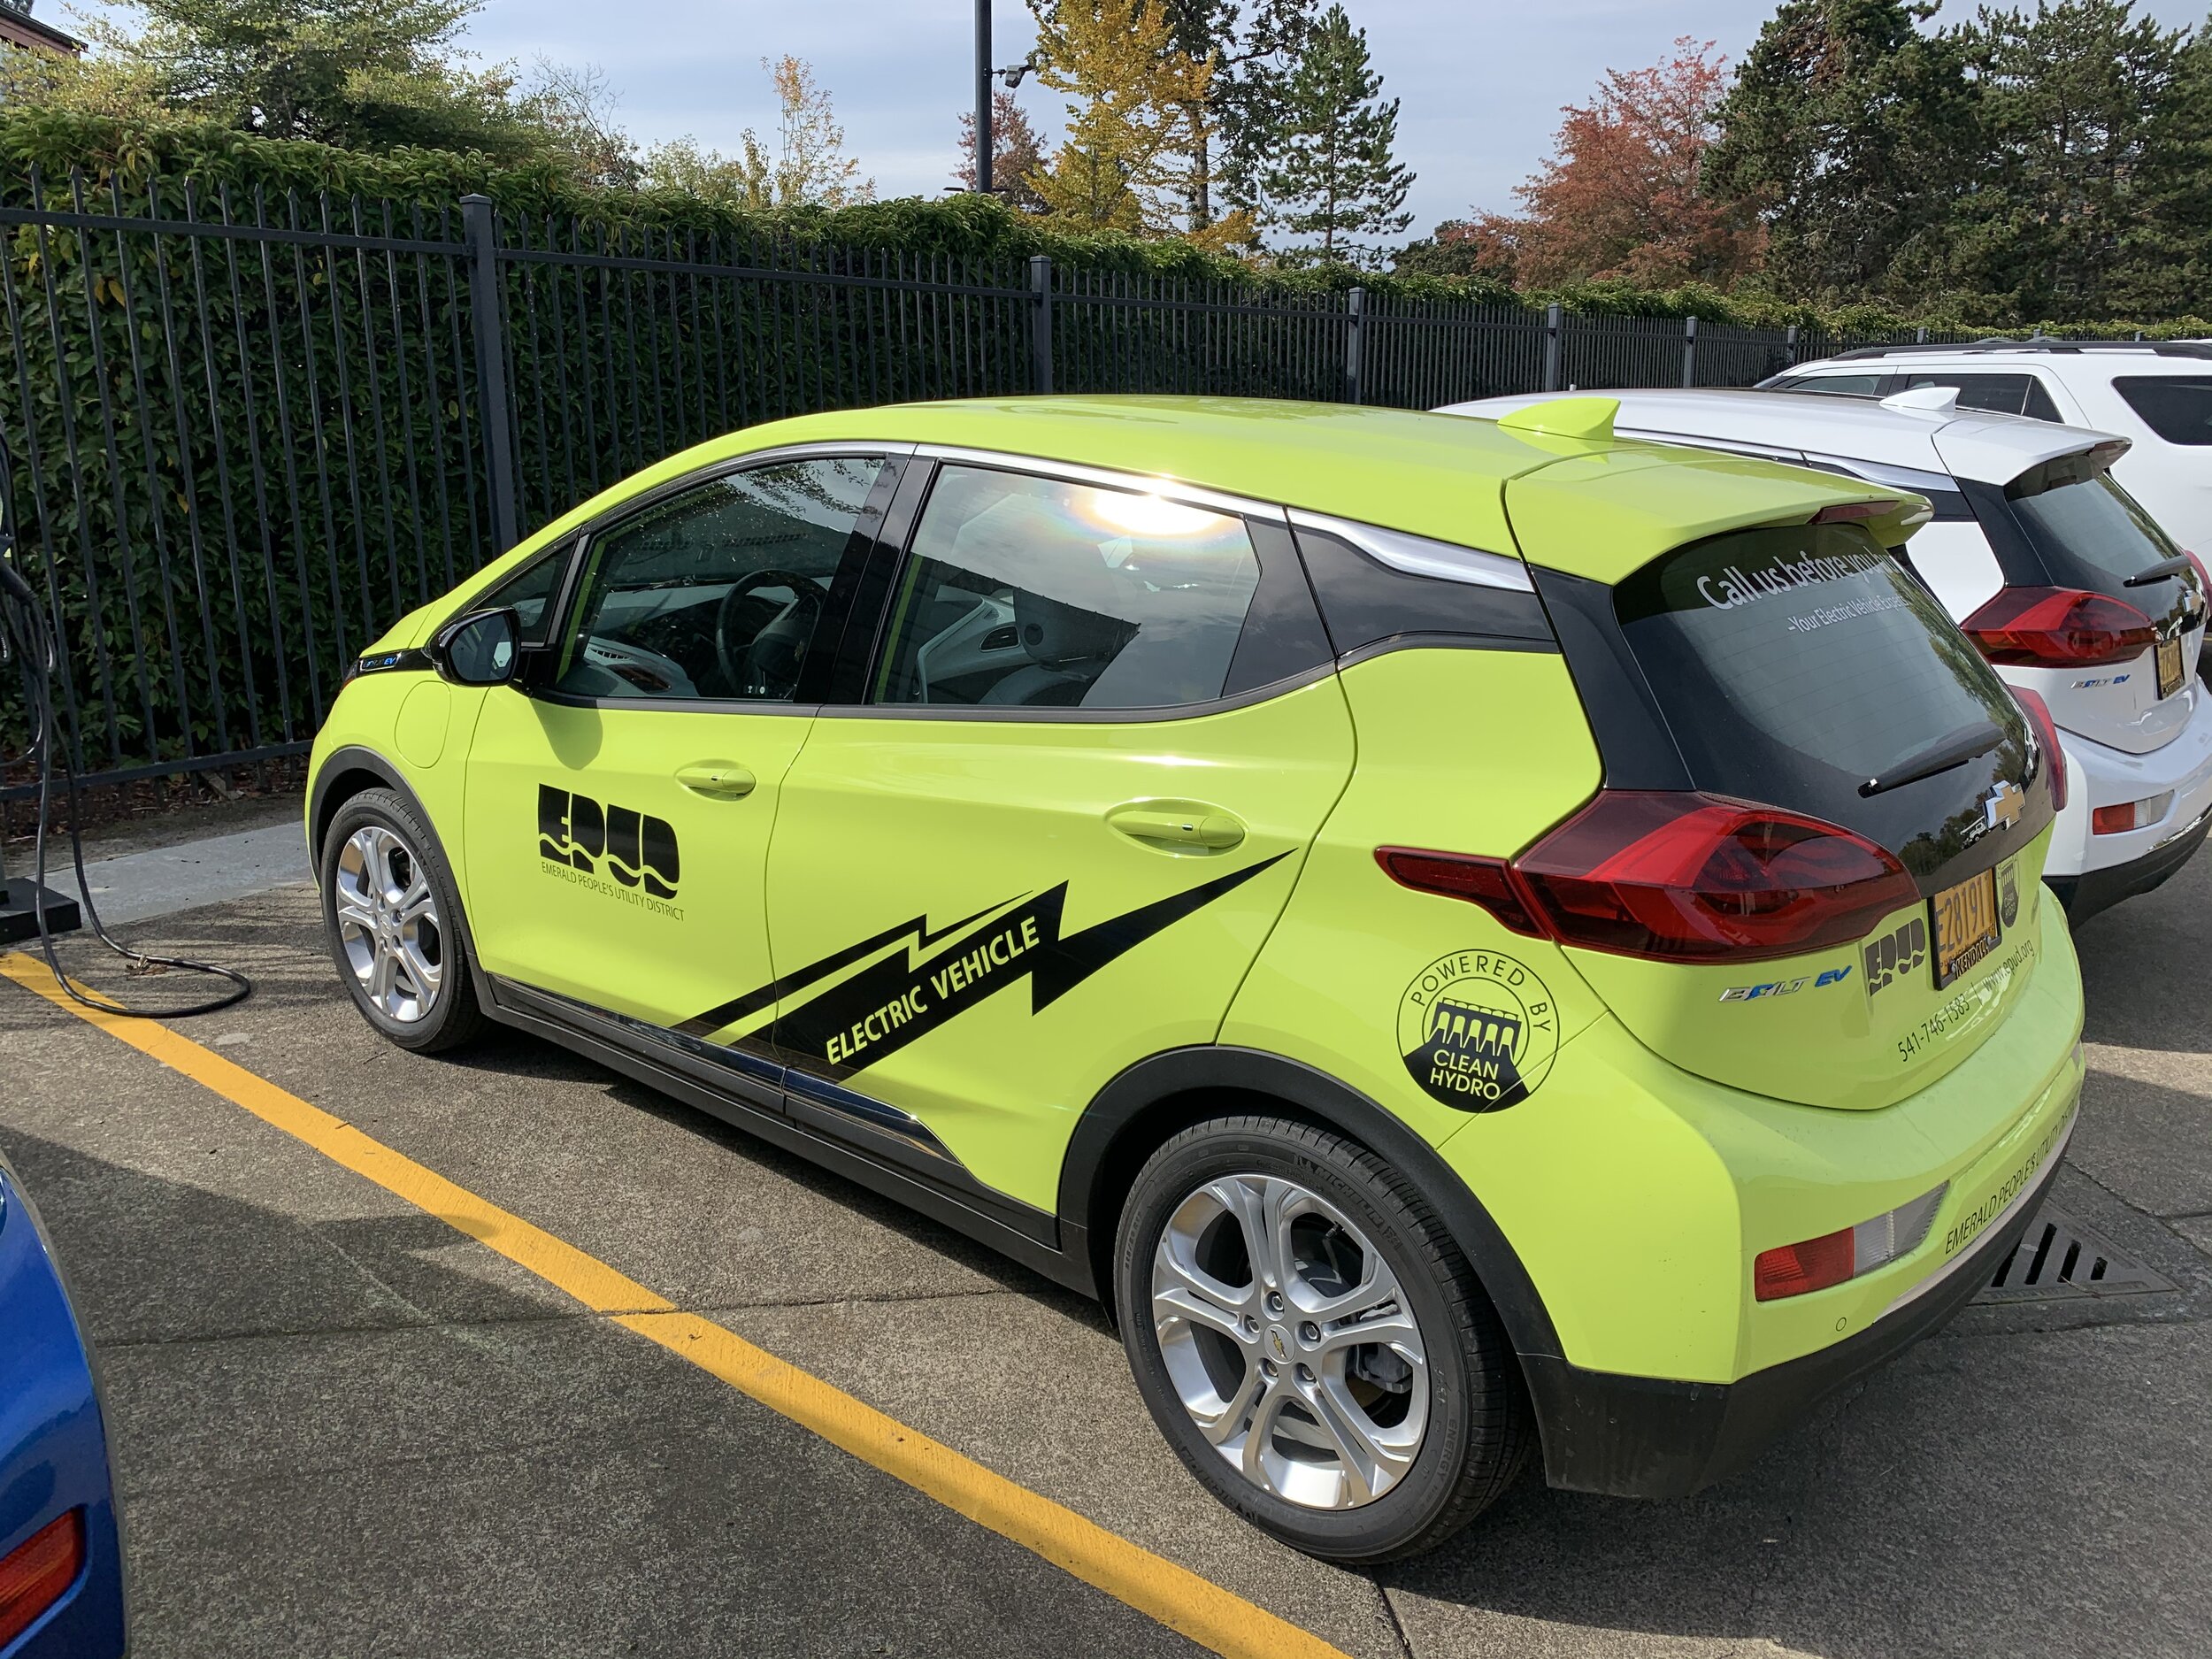 Emerald PUD's fleet includes all-electric Chevy Bolts